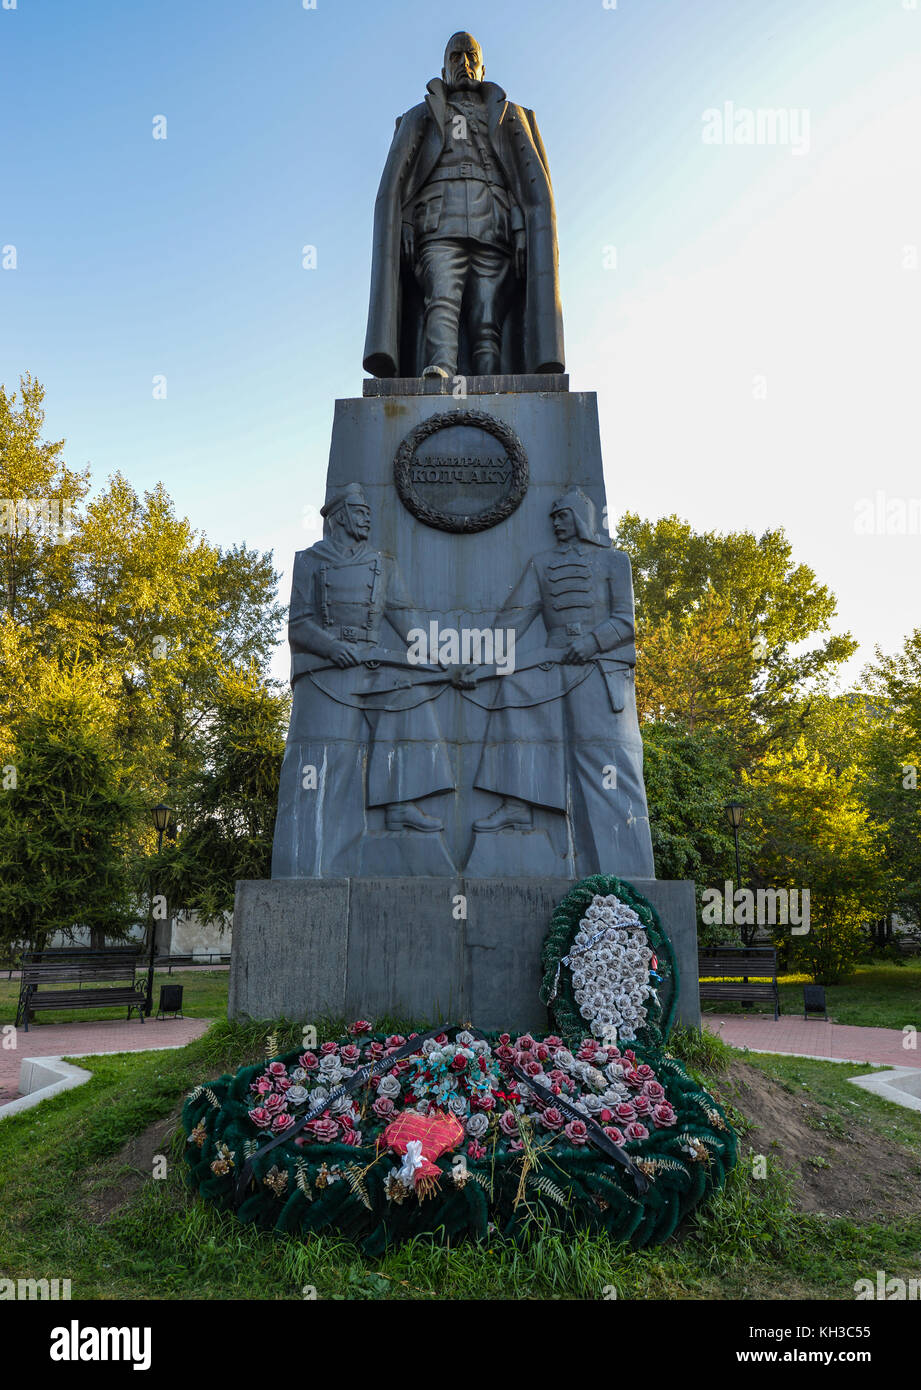 Monument to Admiral Kolchak near the Znamensky Monastery in Irkutsk, Russia at dawn. Leader of the White forces during the Russian Civil War. Stock Photo